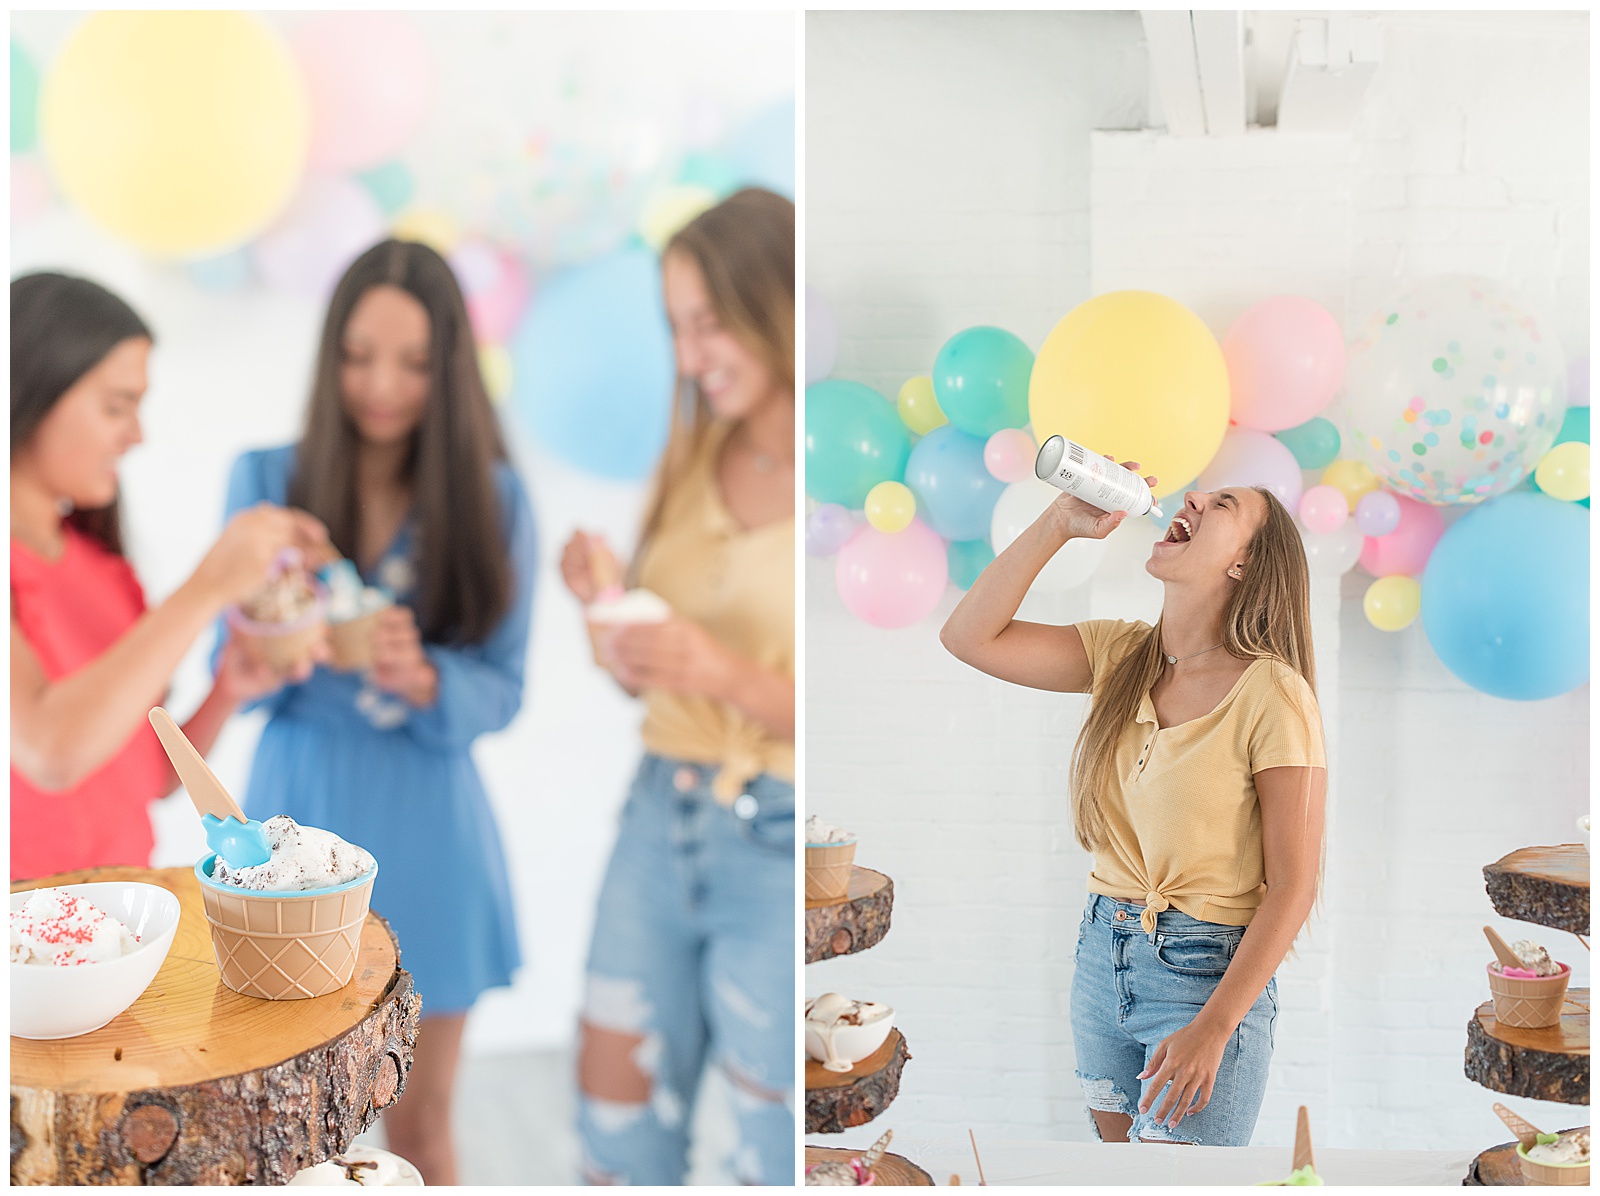 girls enjoying an ice cream social with colorful pastel balloon display in the background